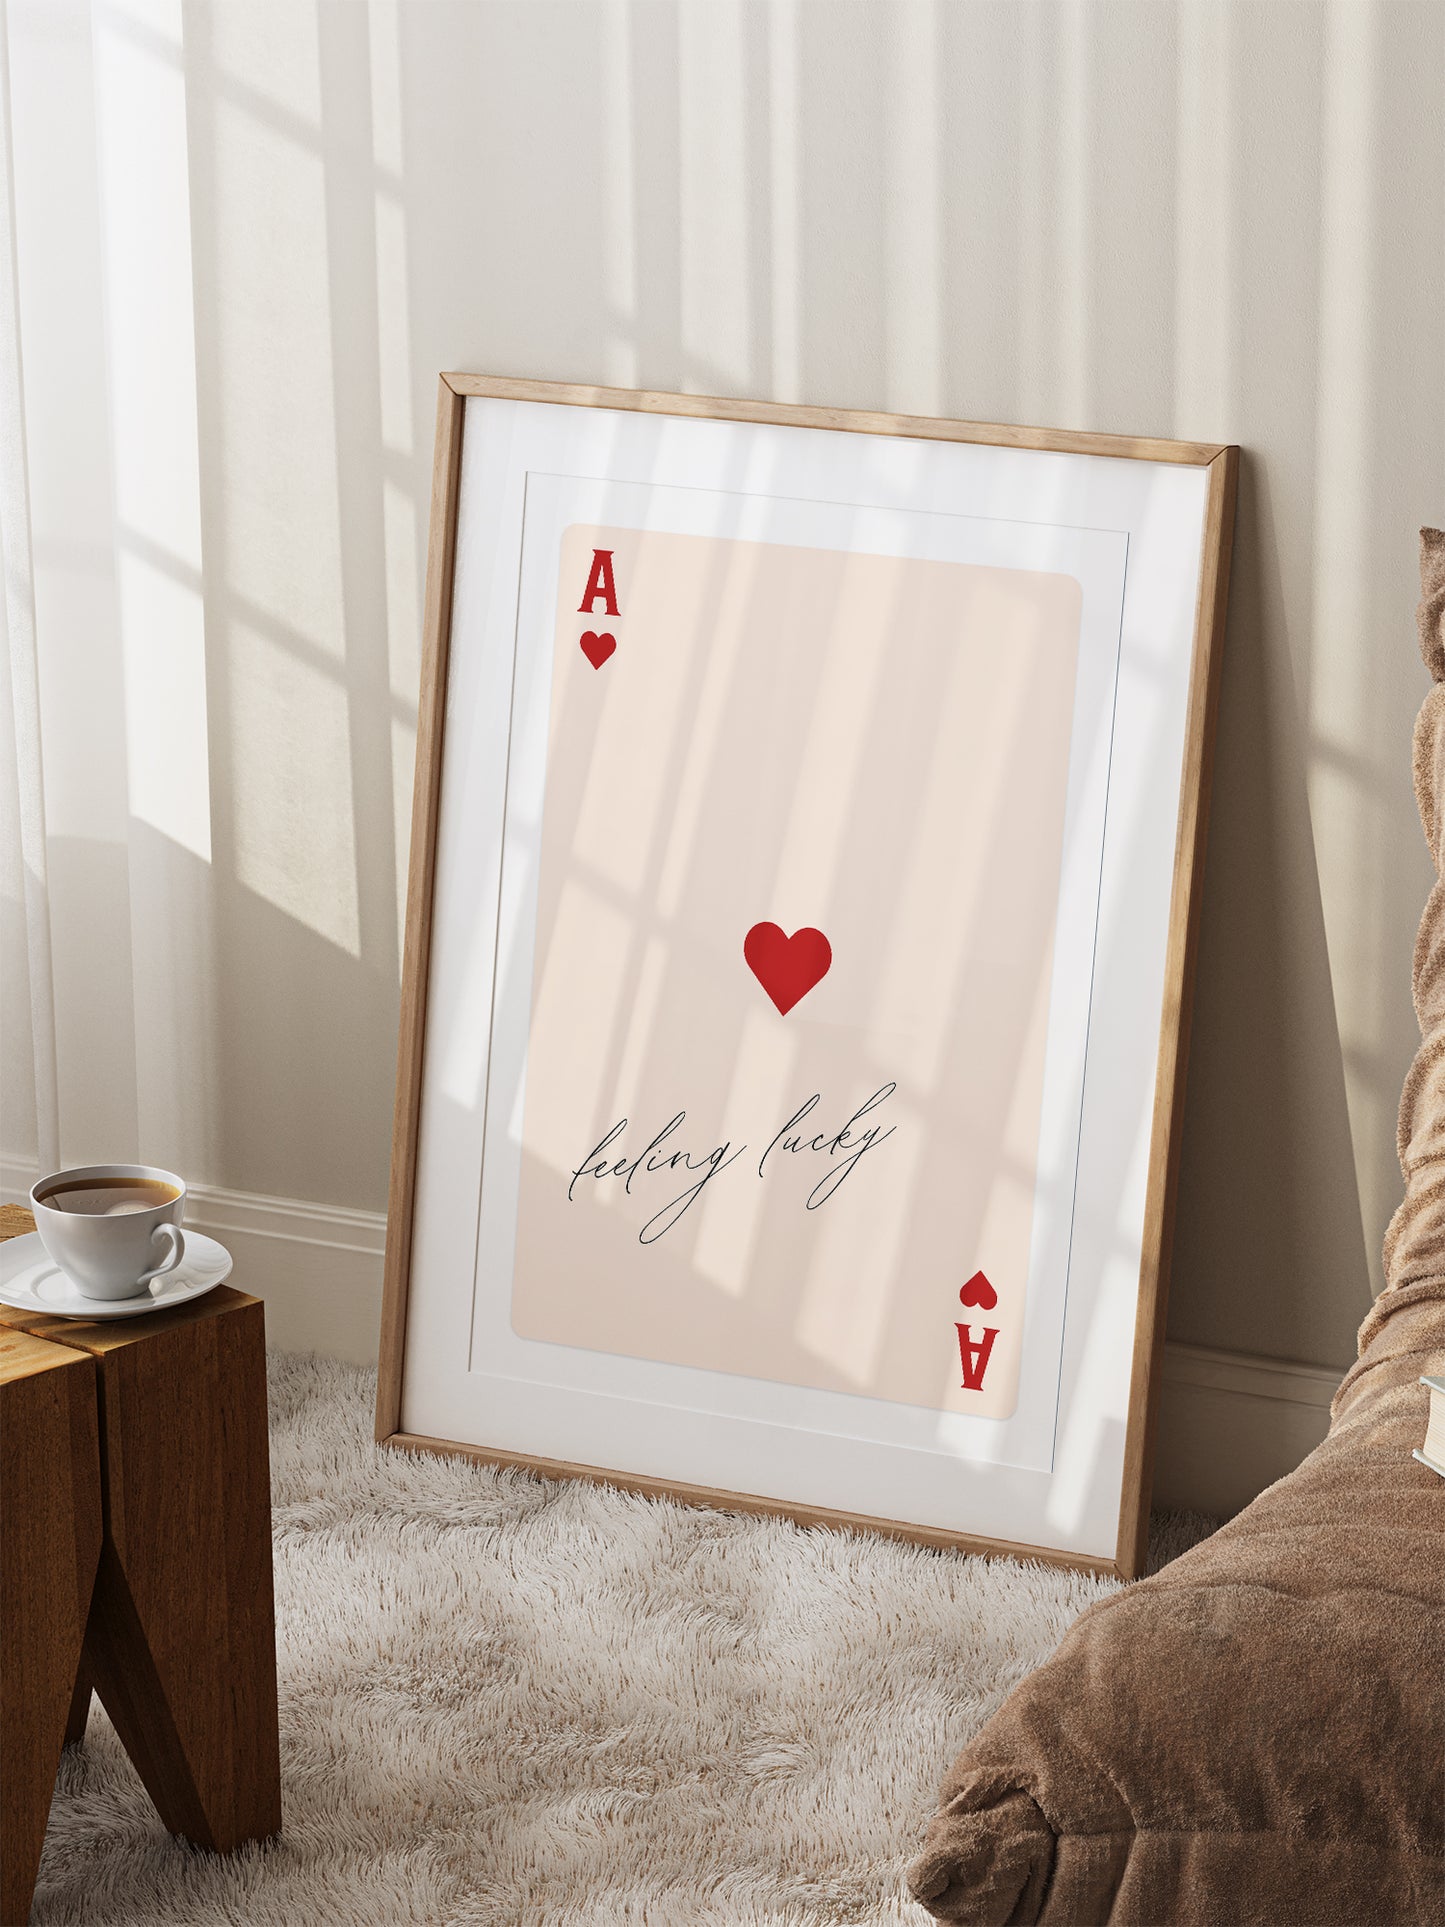 Ace Of Hearts Playing Card Poster